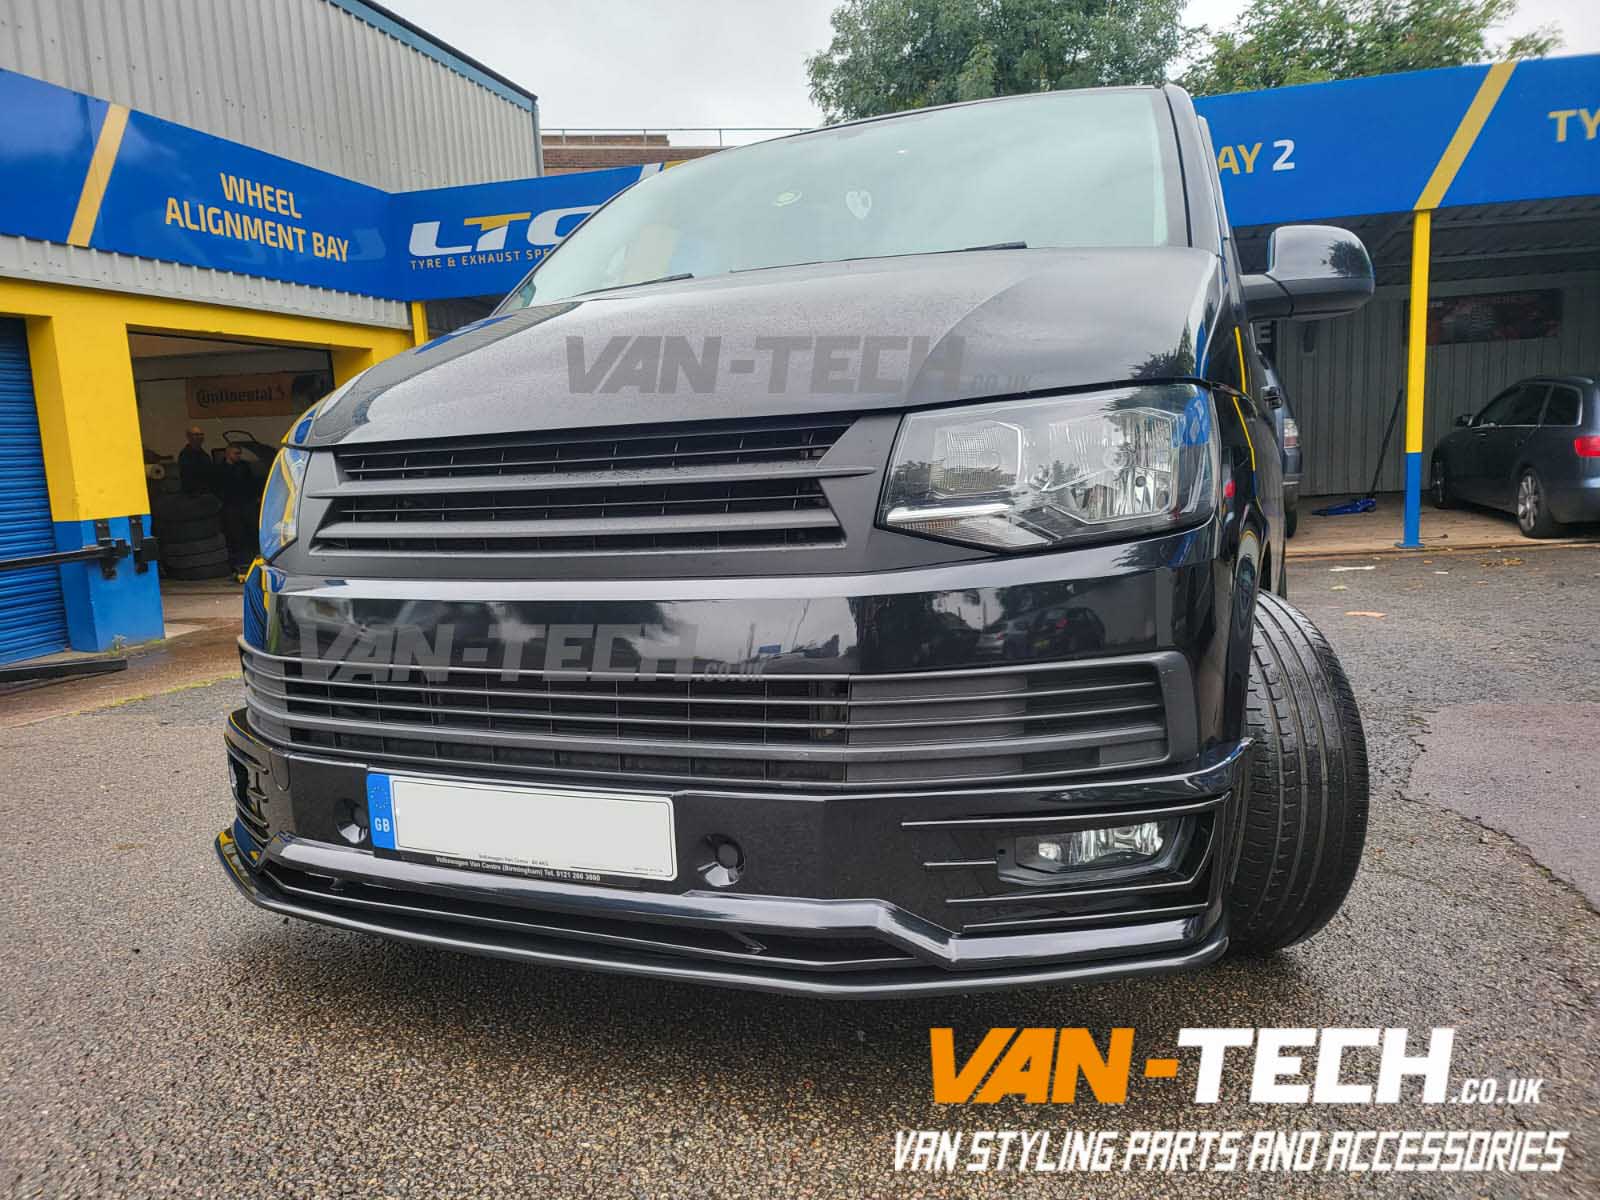 VW Transporter T6 Parts and Accessories - Side Bars, Rear Spoiler, Sportline Bumper and Splitter